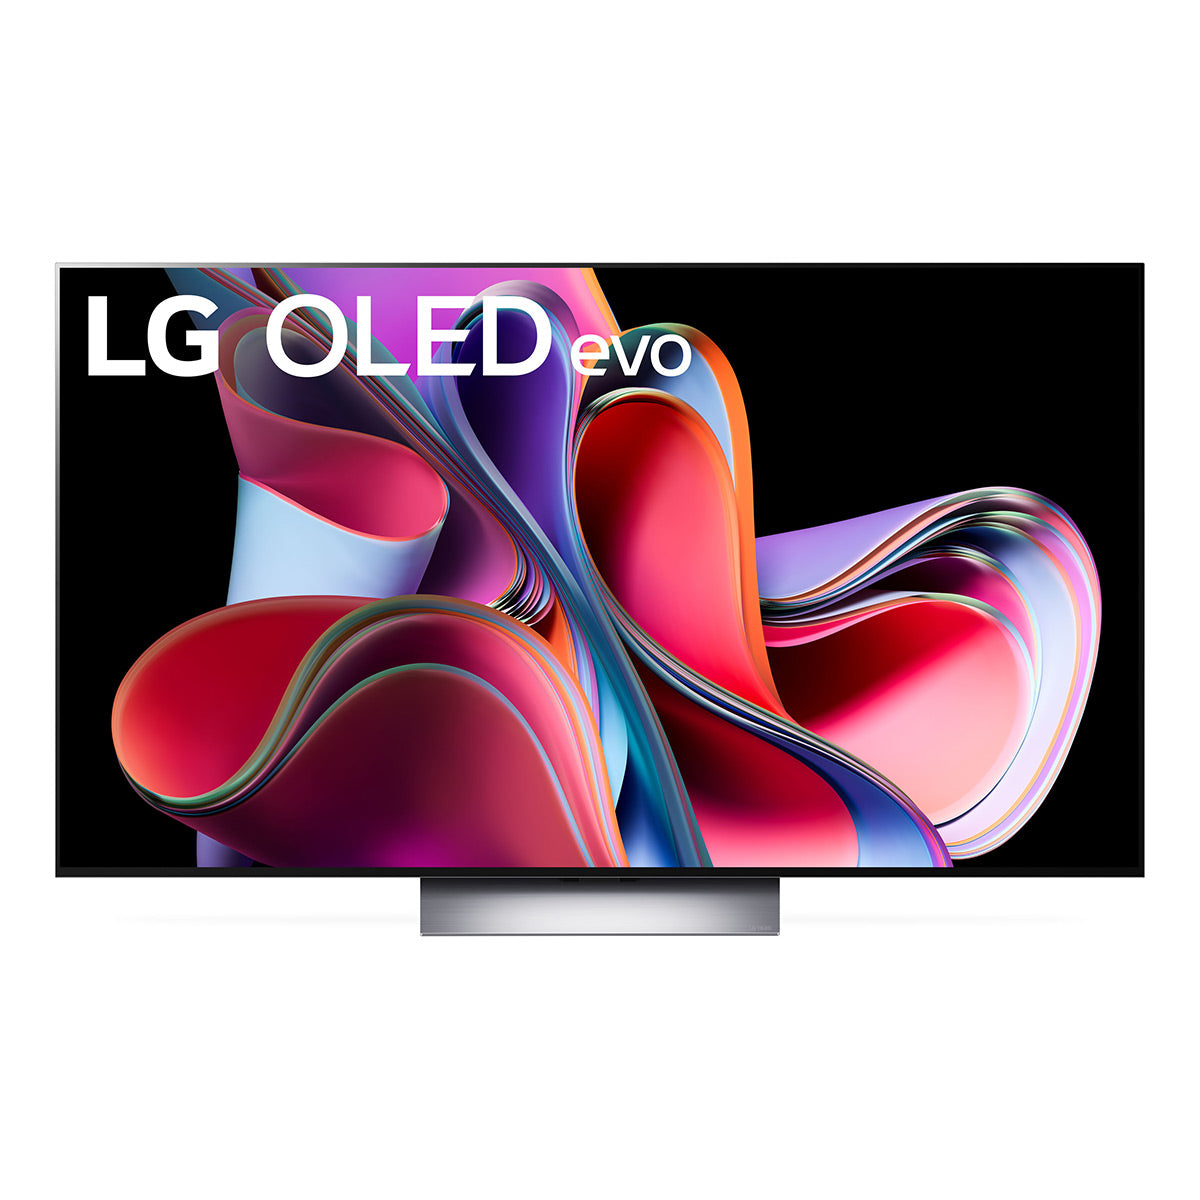 LG OLED55G3PUA 55" 4K UHD OLED evo Gallery Edition Smart TV with Brightness Booster Max, One Wall Design, Dolby Vision, & A9 Intelligent Processor (2023)